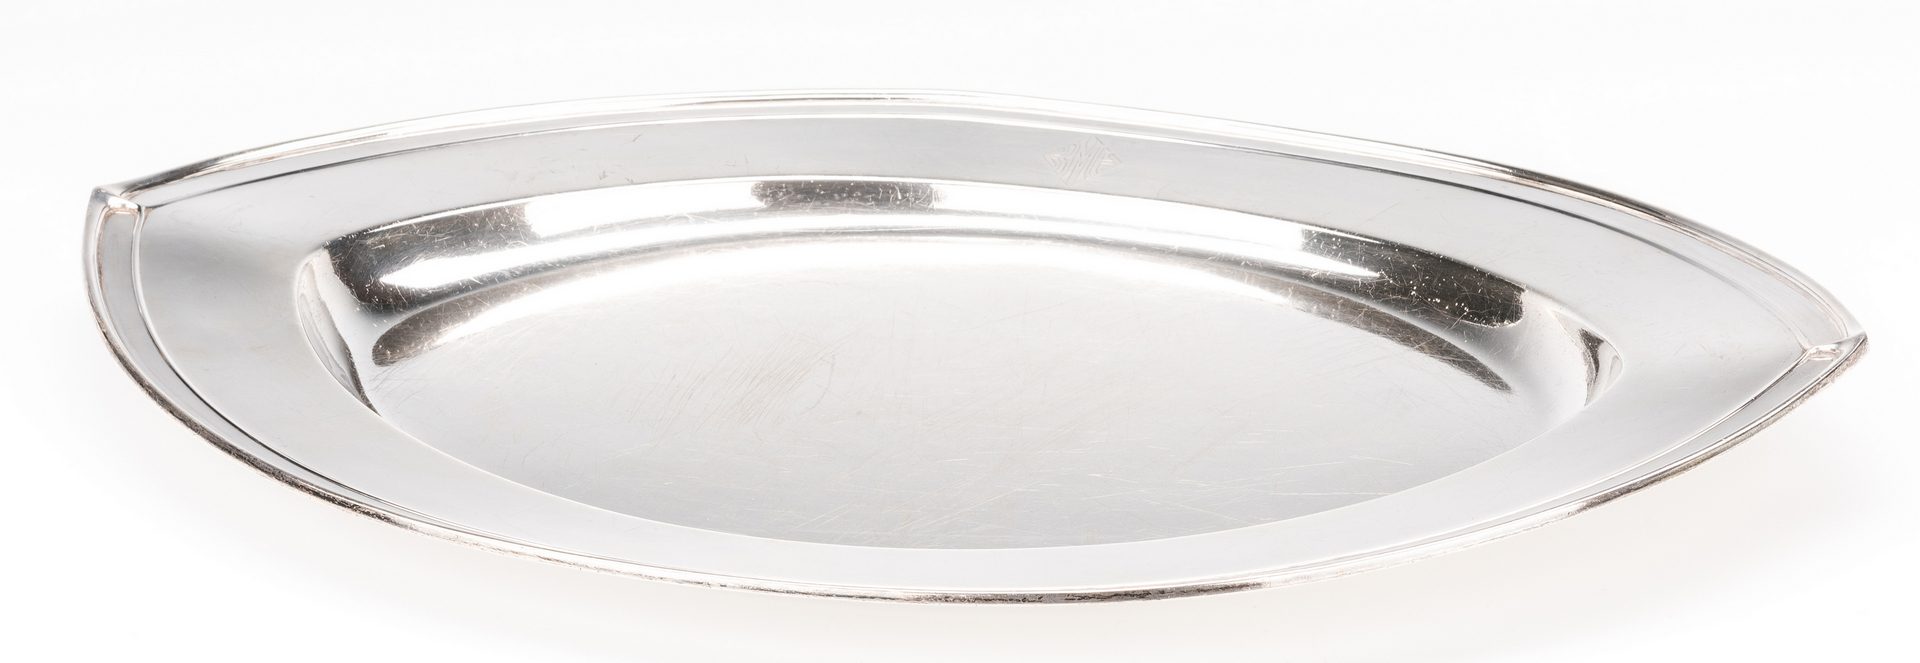 Lot 405: Gorham Art Deco Sterling Tray, 20" Oval